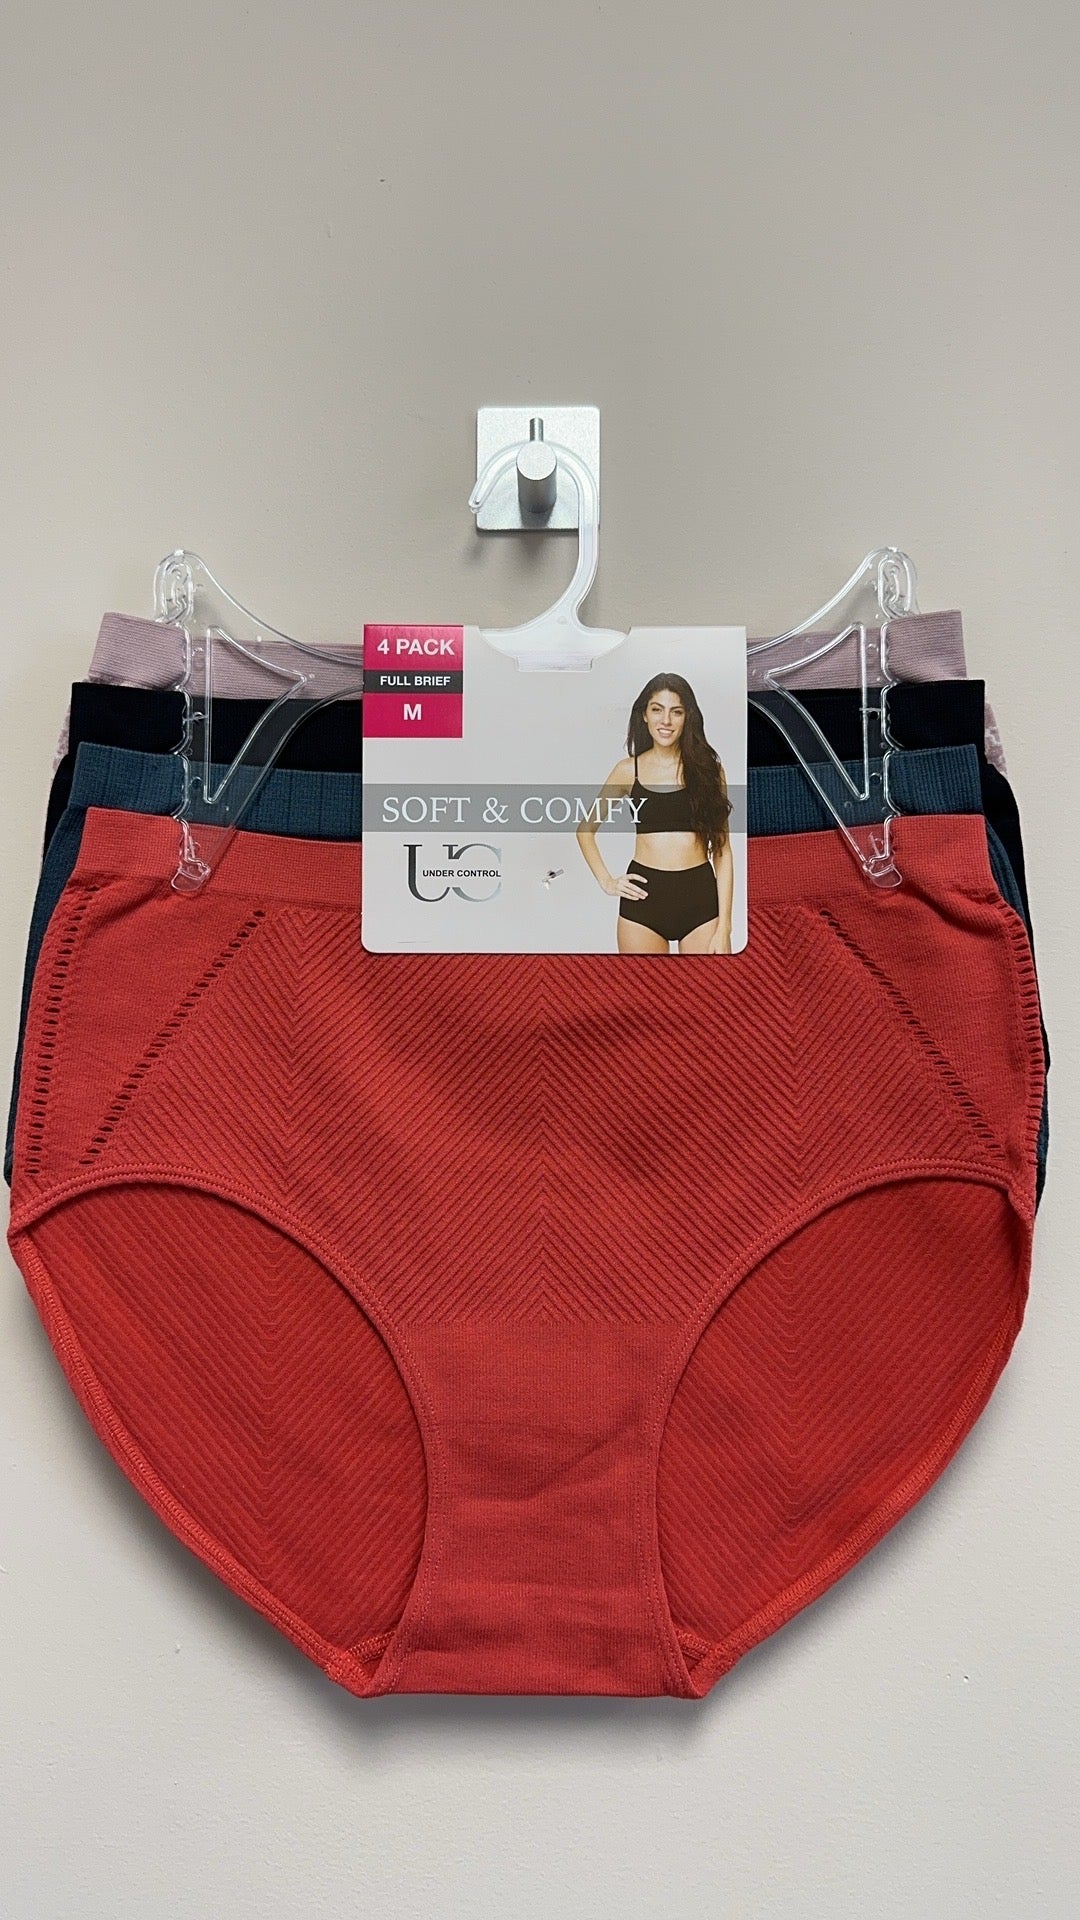 Under Control /JILLAWomen Mystery colors 4-Pack Full Brief --Sample S